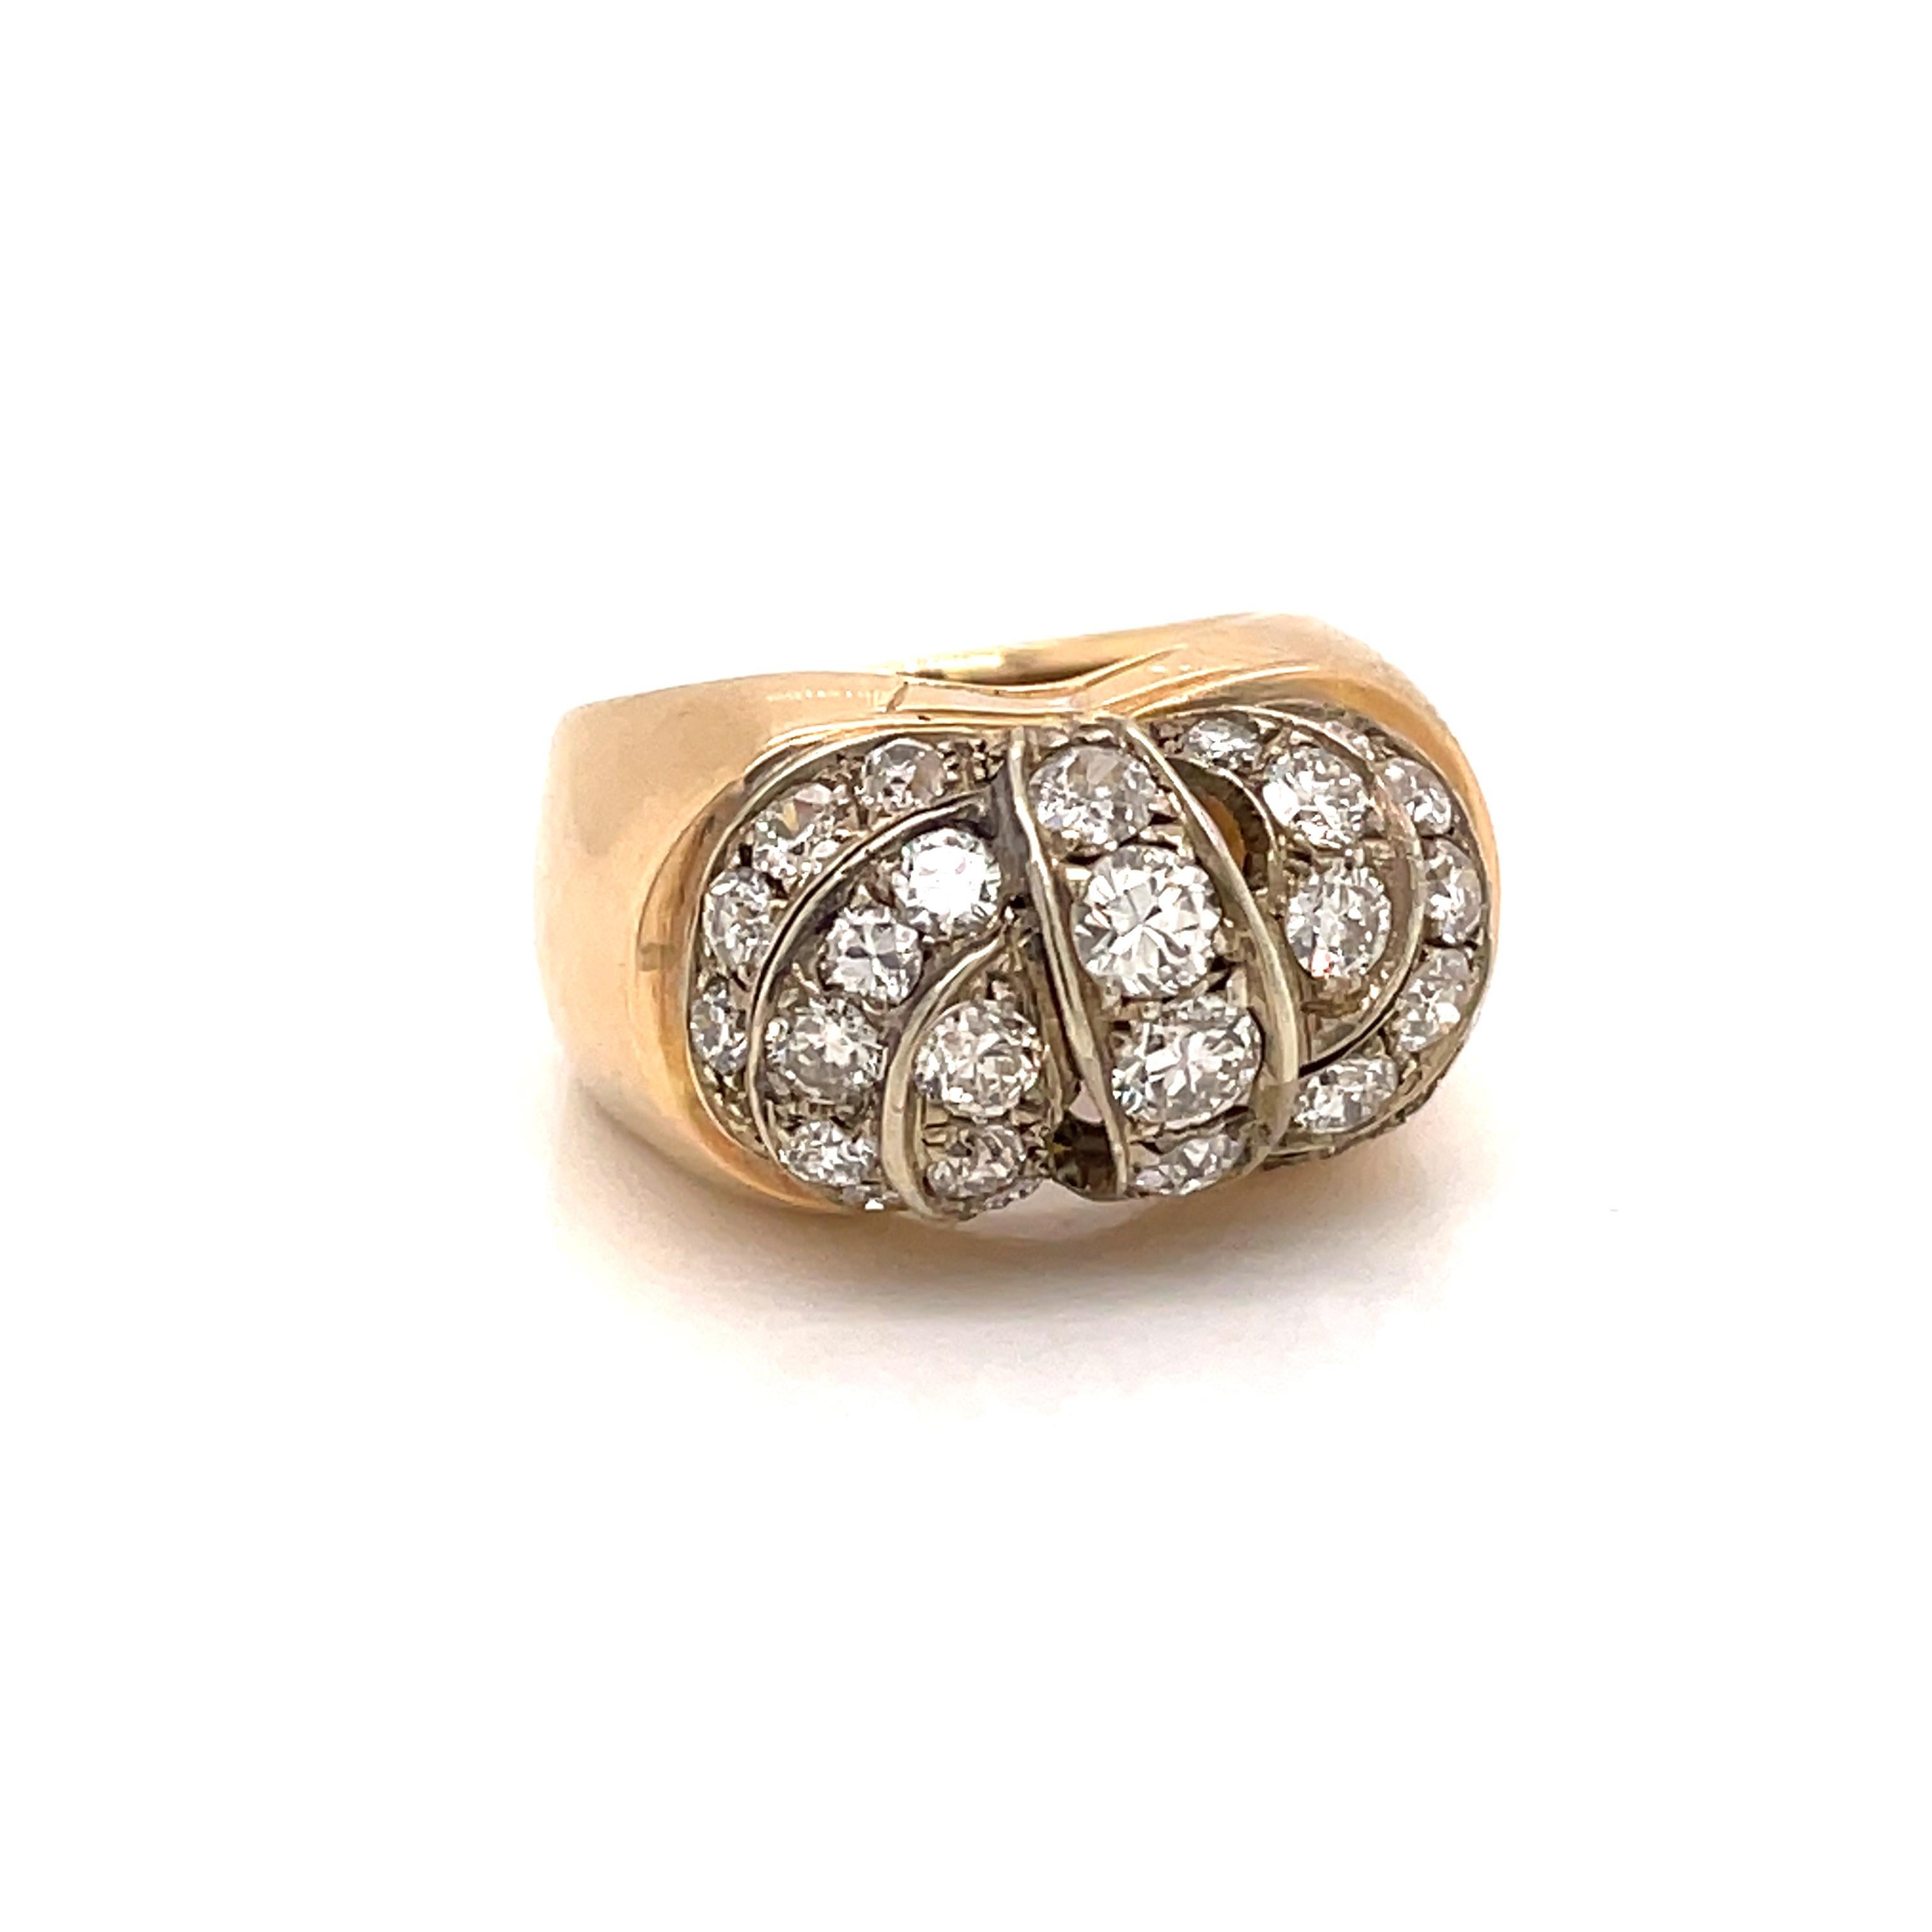 An Authentic Retro ring, original from 1940, made in Italy, mounted in 18k yellow gold.

The ring has a wide, textured band comprised of ridged grooves that travel around the entire outer surface, in the center there are five vertical rows of large